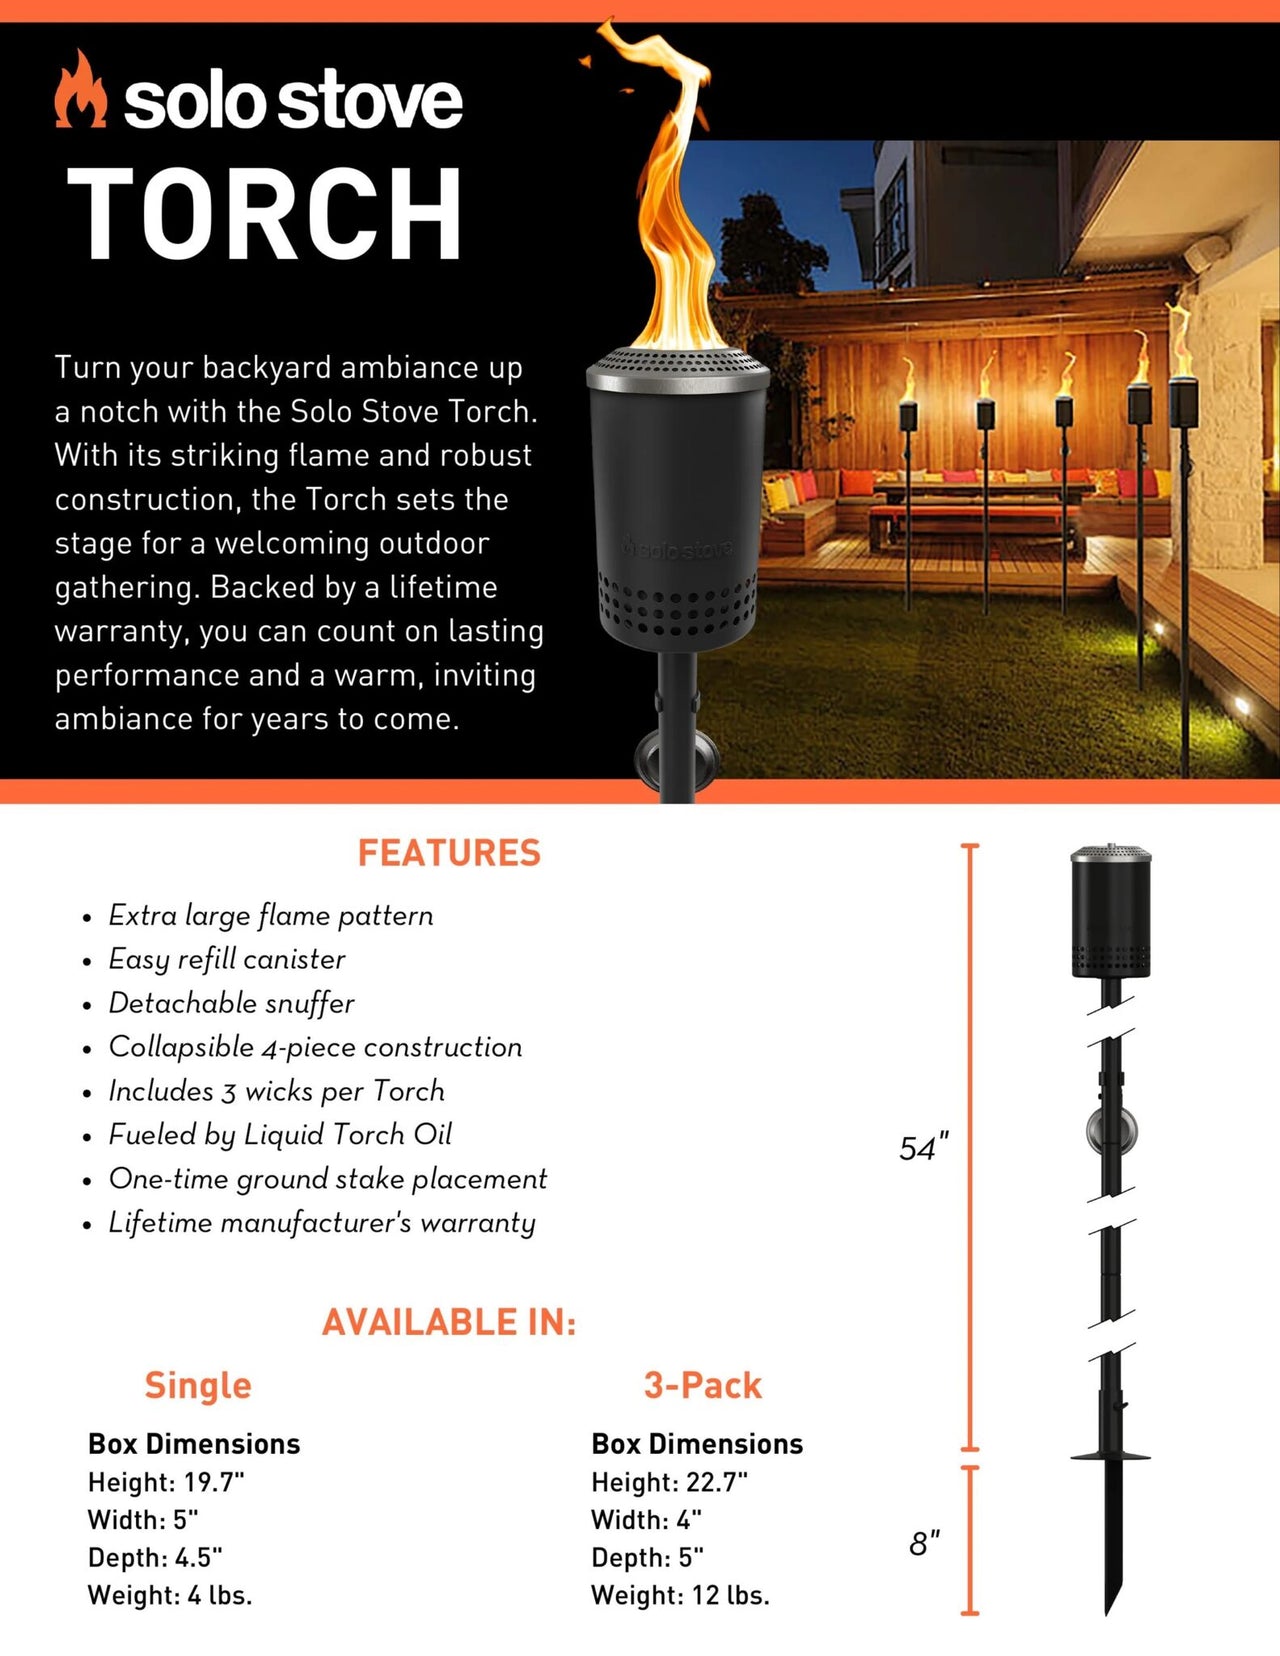 The Torch 3 pack